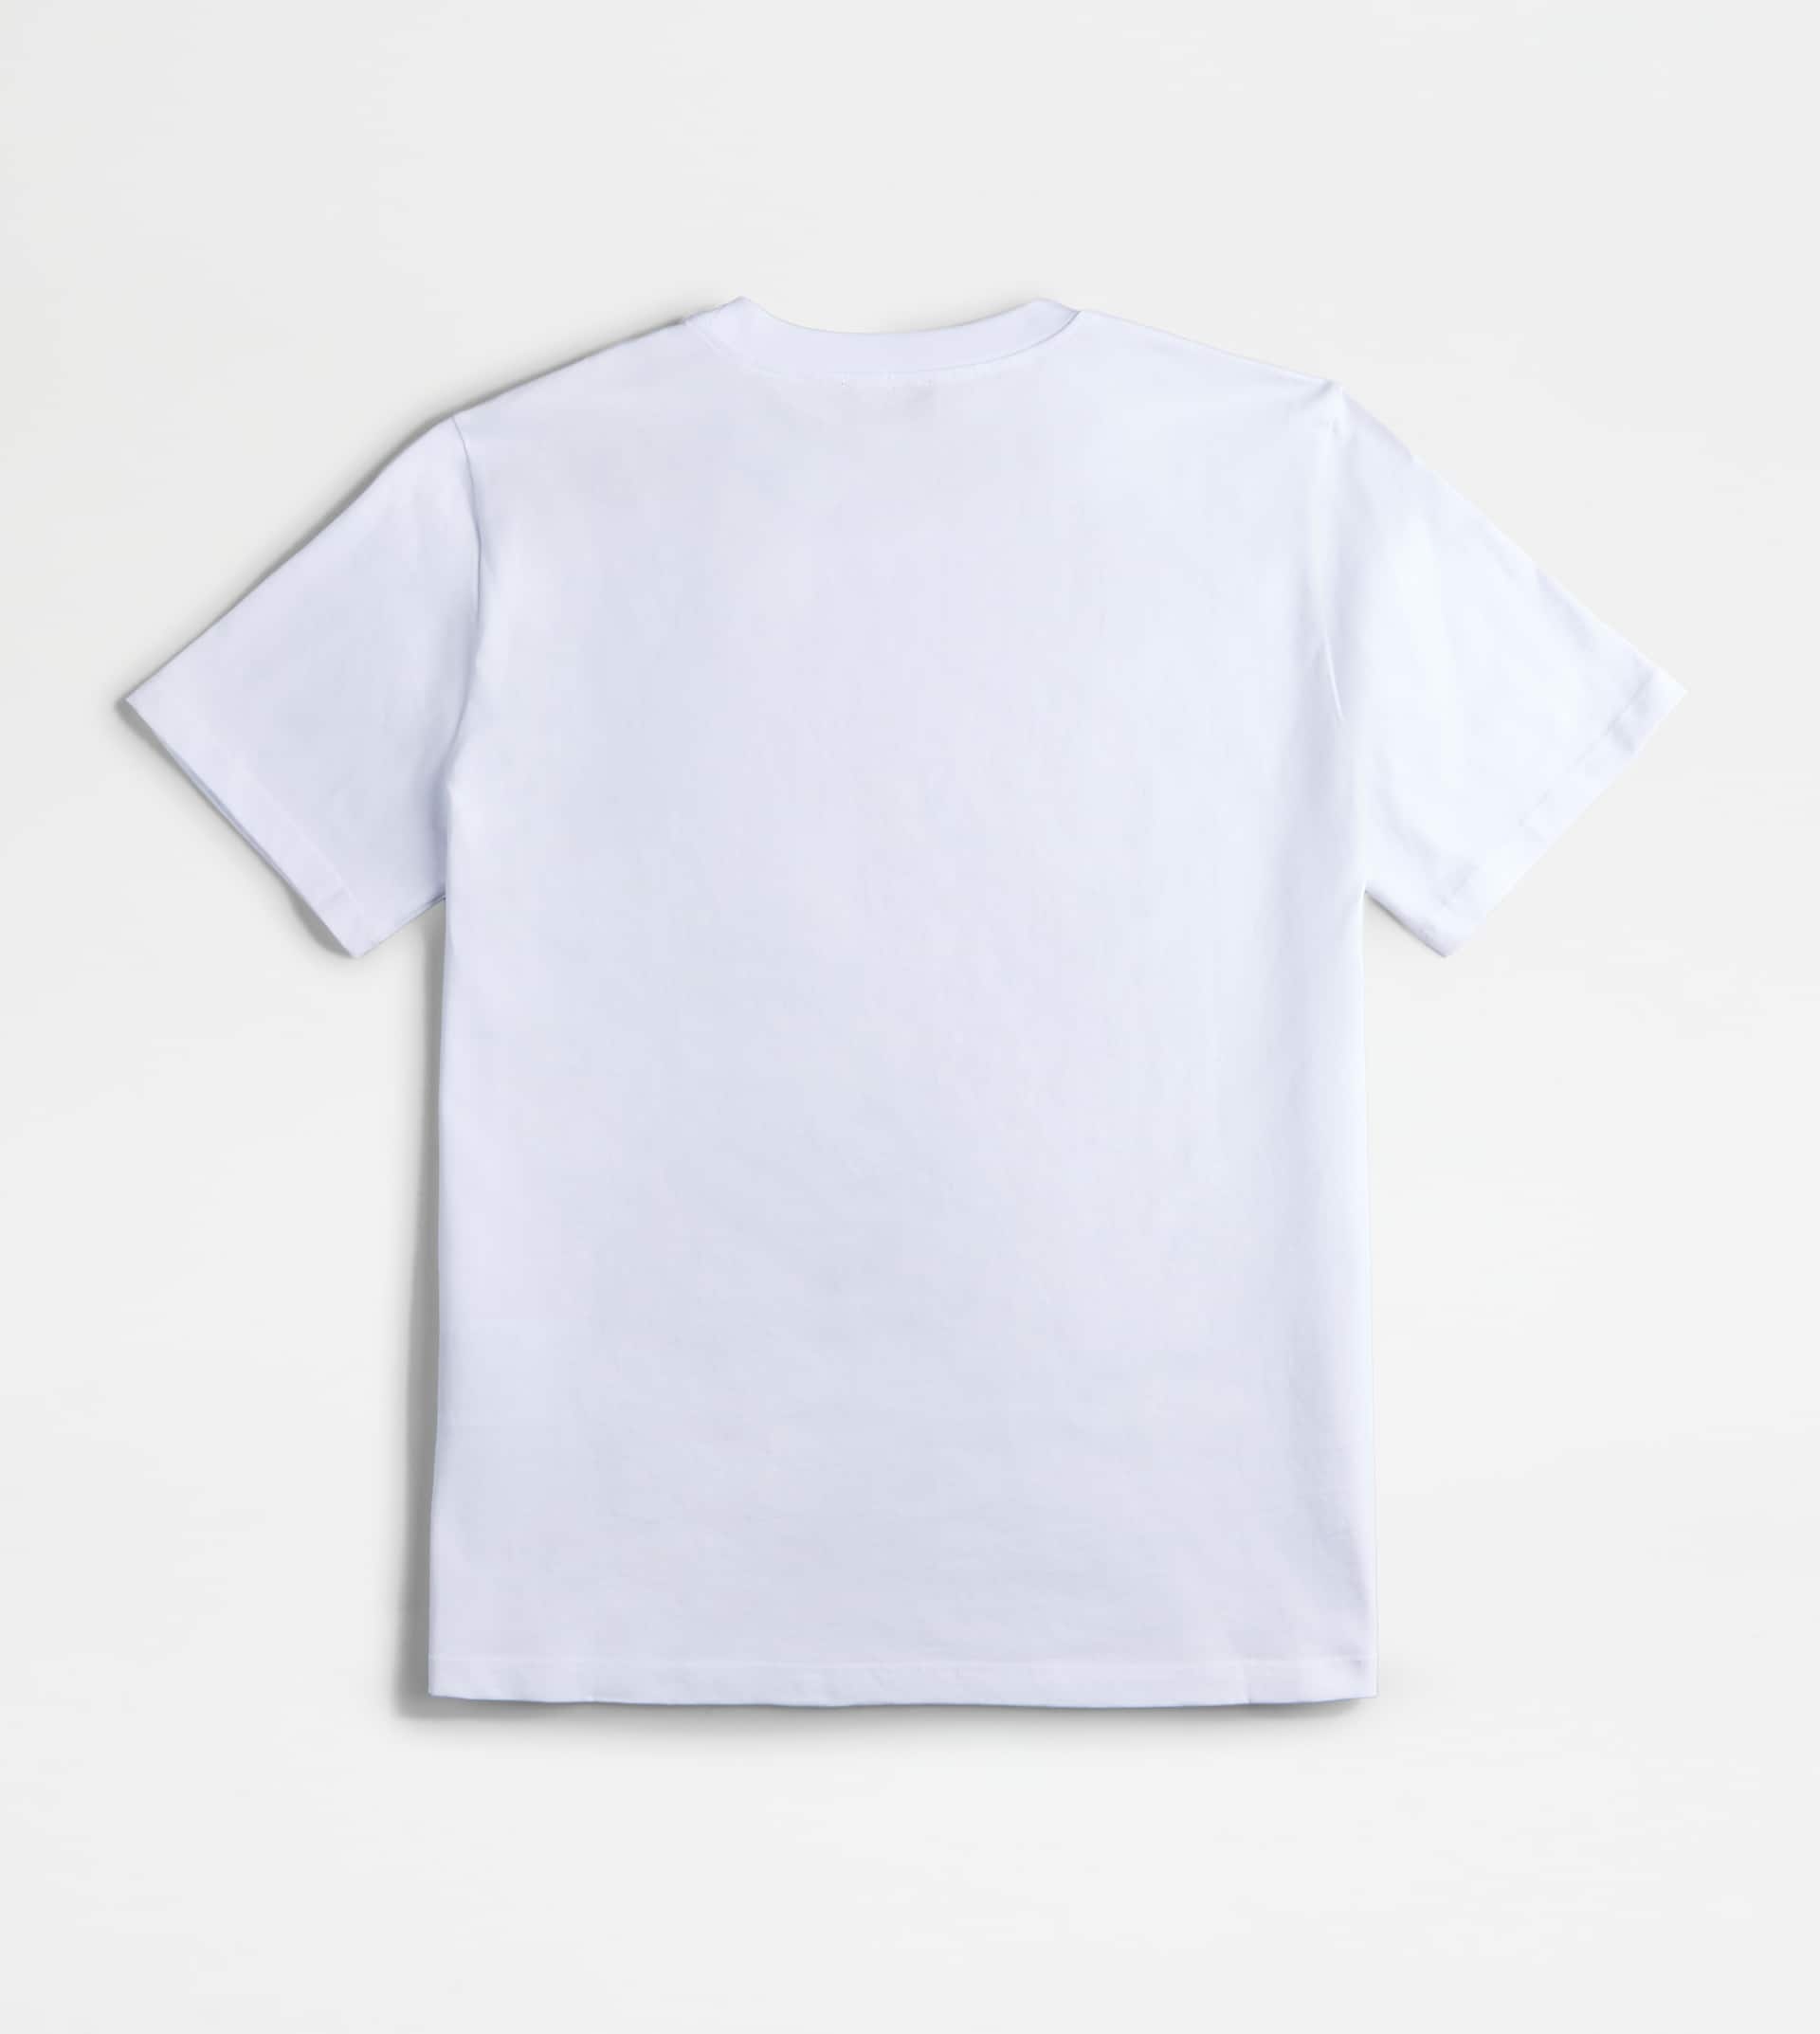 T-SHIRT IN JERSEY - WHITE - 7